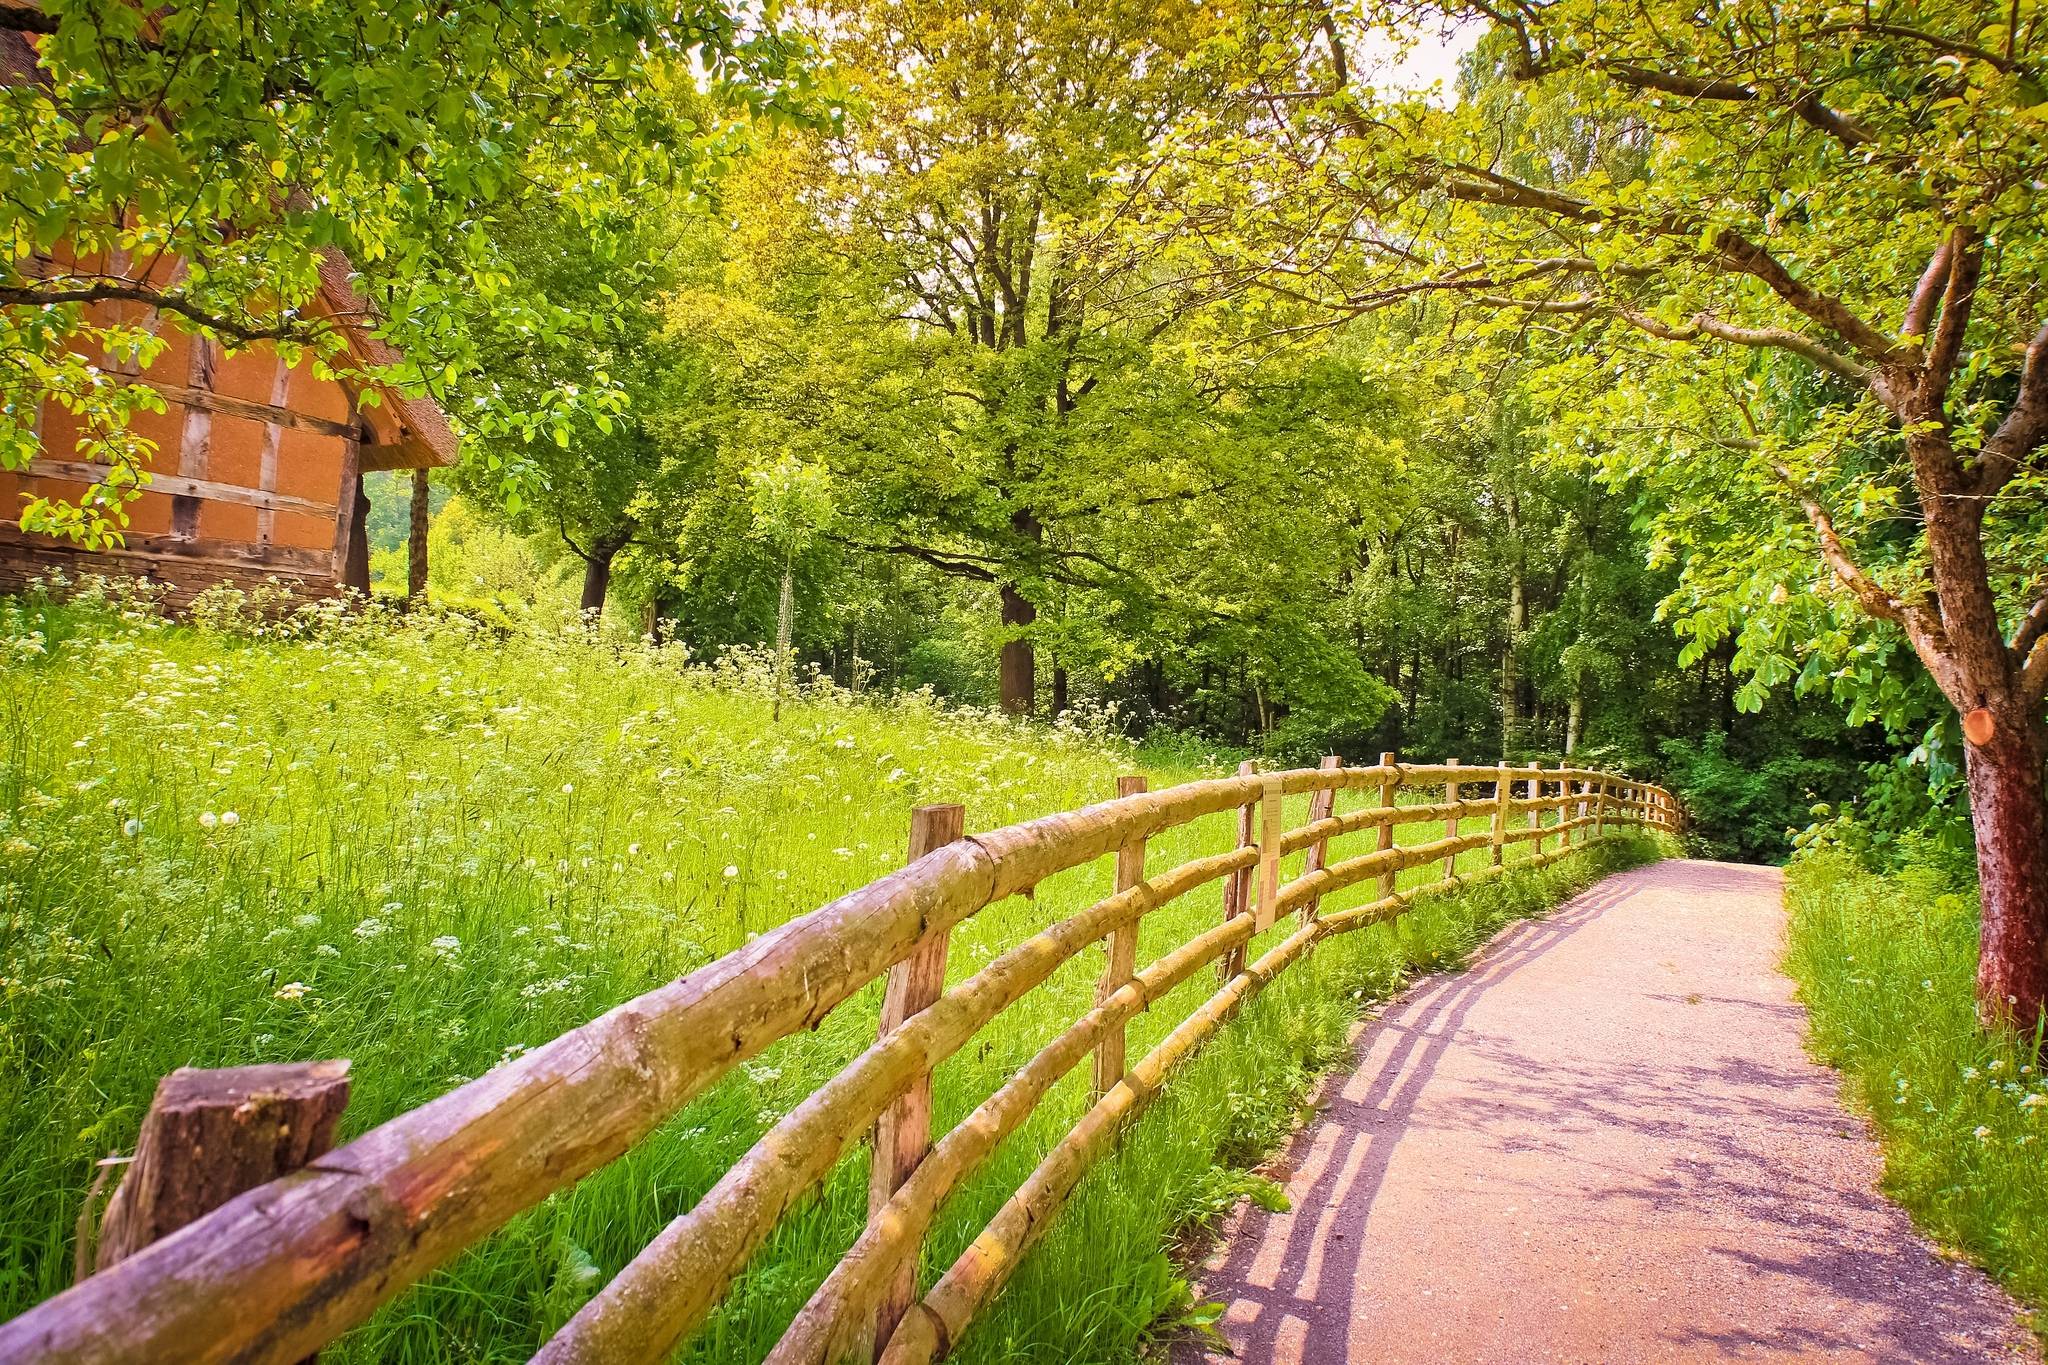 Road shadow fence wood trees grass green house summer nature